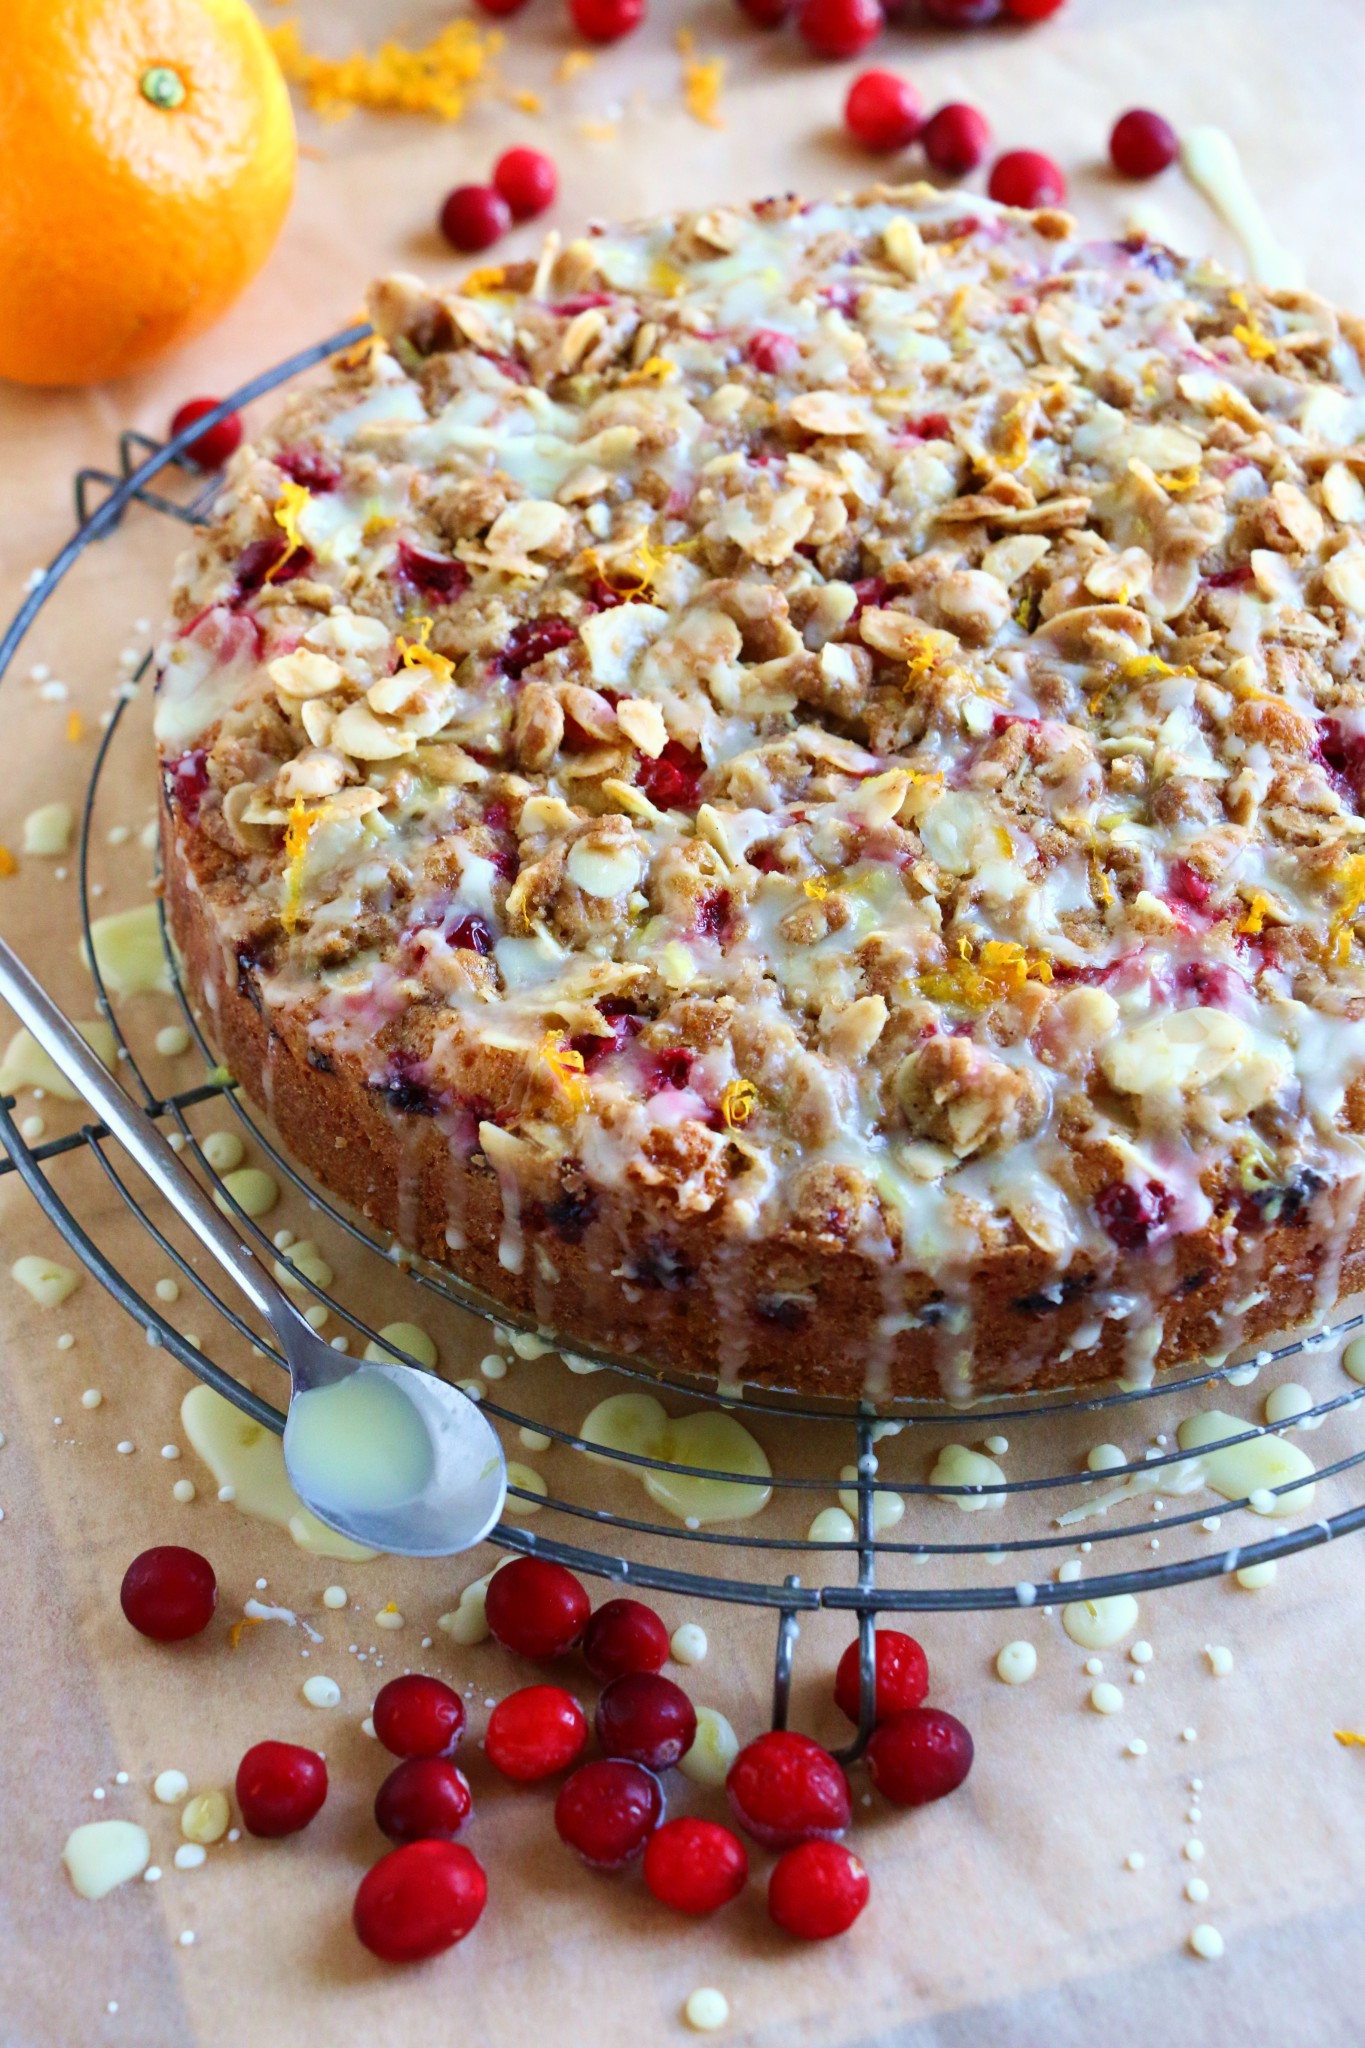 Cranberry and orange streusel cake - Crumbs on the Table